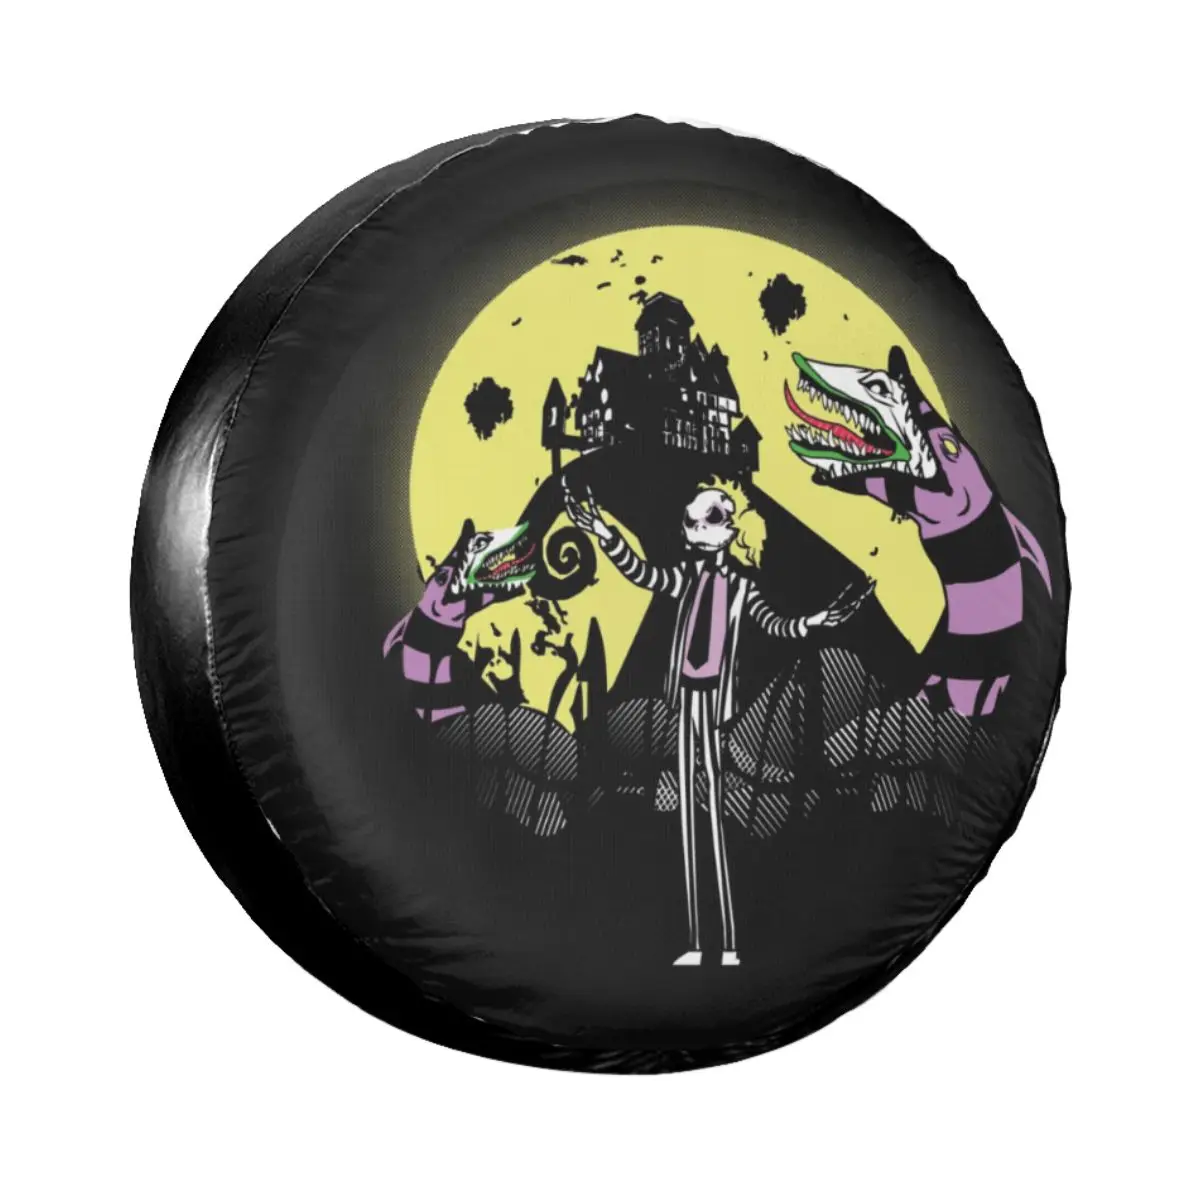 

Bettlejack Revisited Spare Tire Cover for Jeep Mitsubishi Pajero Tim Burton Beetlejuice Car Wheel Protectors 14" 15" 16" 17"